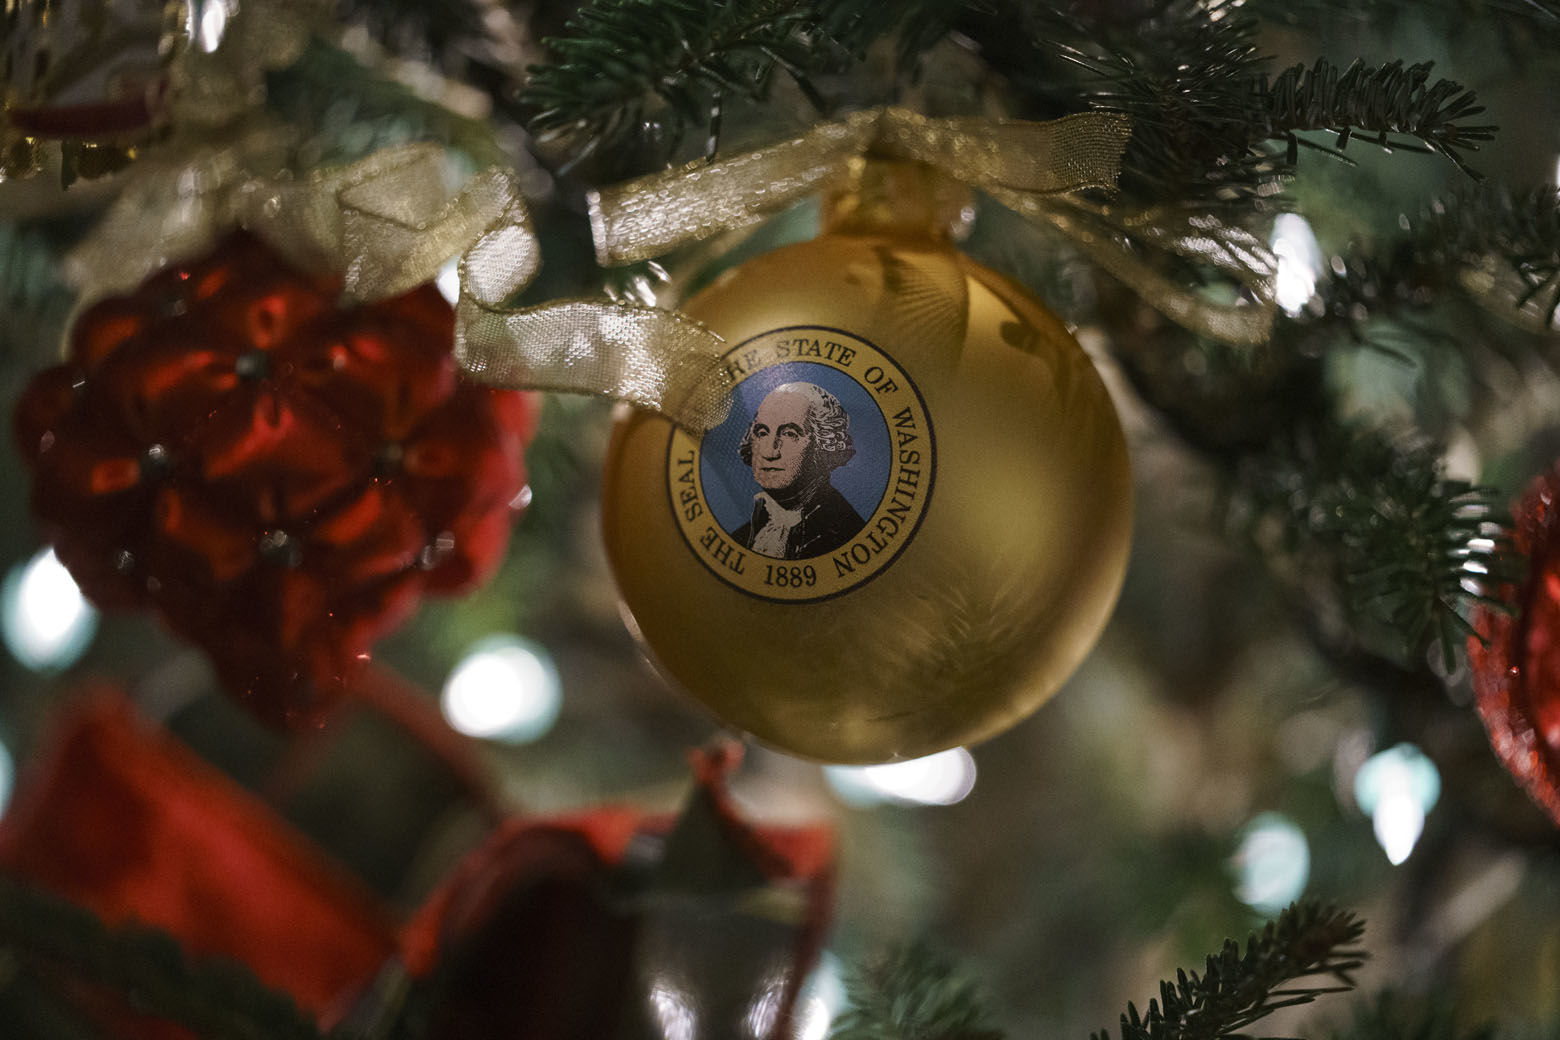 An ornament with an image of President George Washington is seen during the 2018 Christmas preview at the White House in Washington, Monday, Nov. 26, 2018. Christmas has arrived at the White House for 2018 as first lady Melania Trump unveiled the holiday decor. She designed the decor, which features a theme of "American Treasures." (AP Photo/Carolyn Kaster)